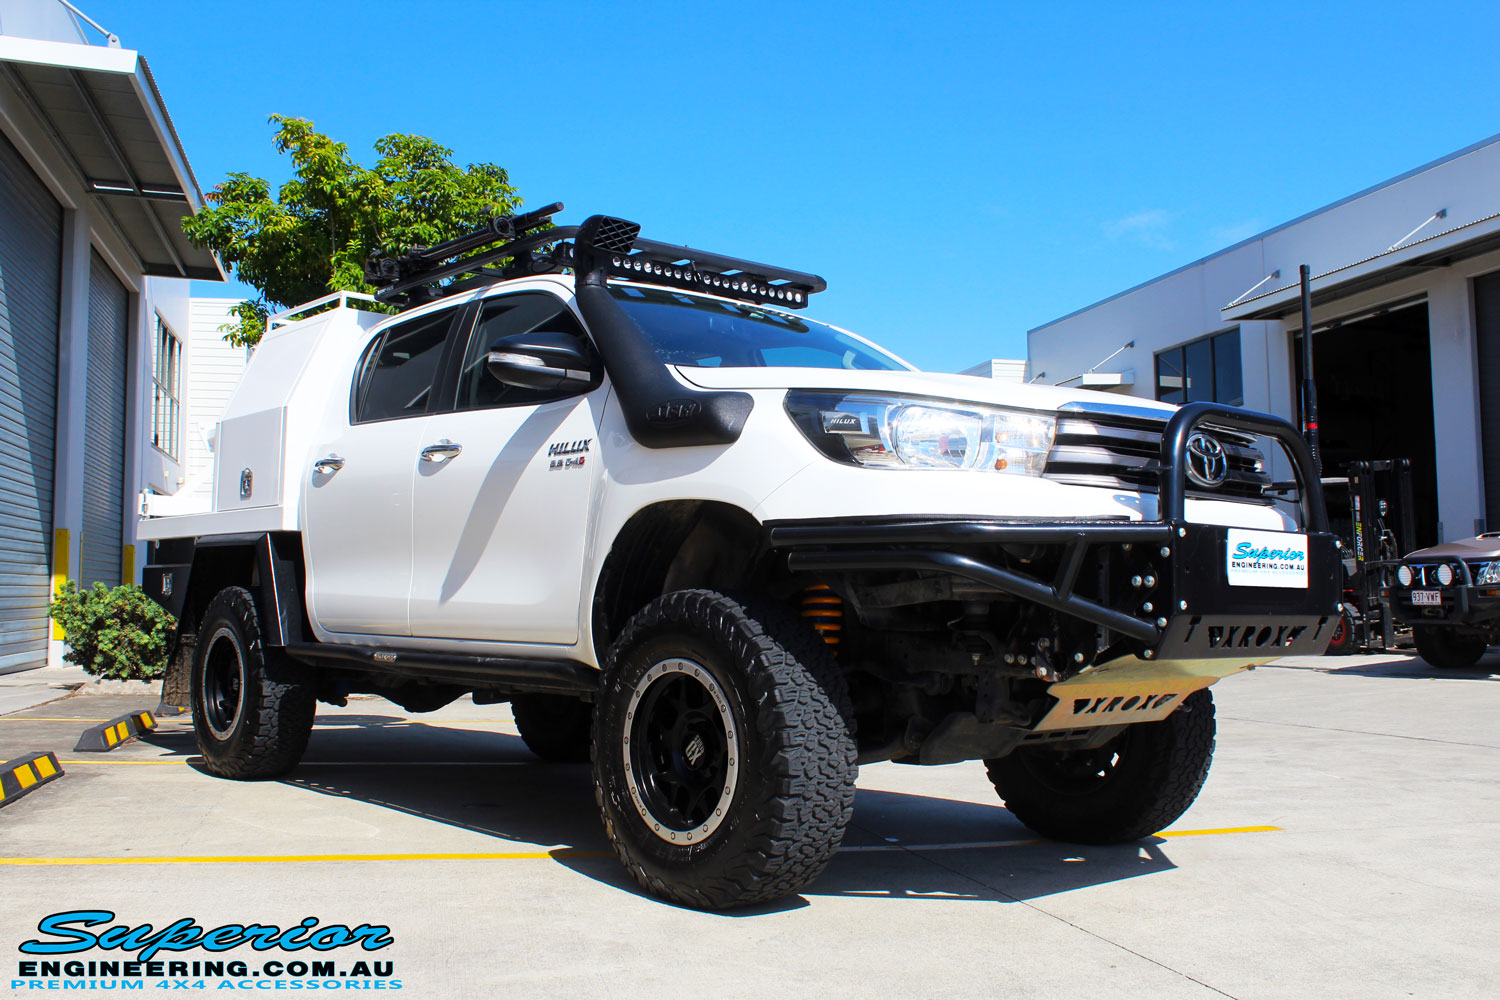 Right front side view of a White Toyota Revo Hilux Dual Cab after fitment of Adjustable Remote Reservoir Front Struts & King Coil Springs